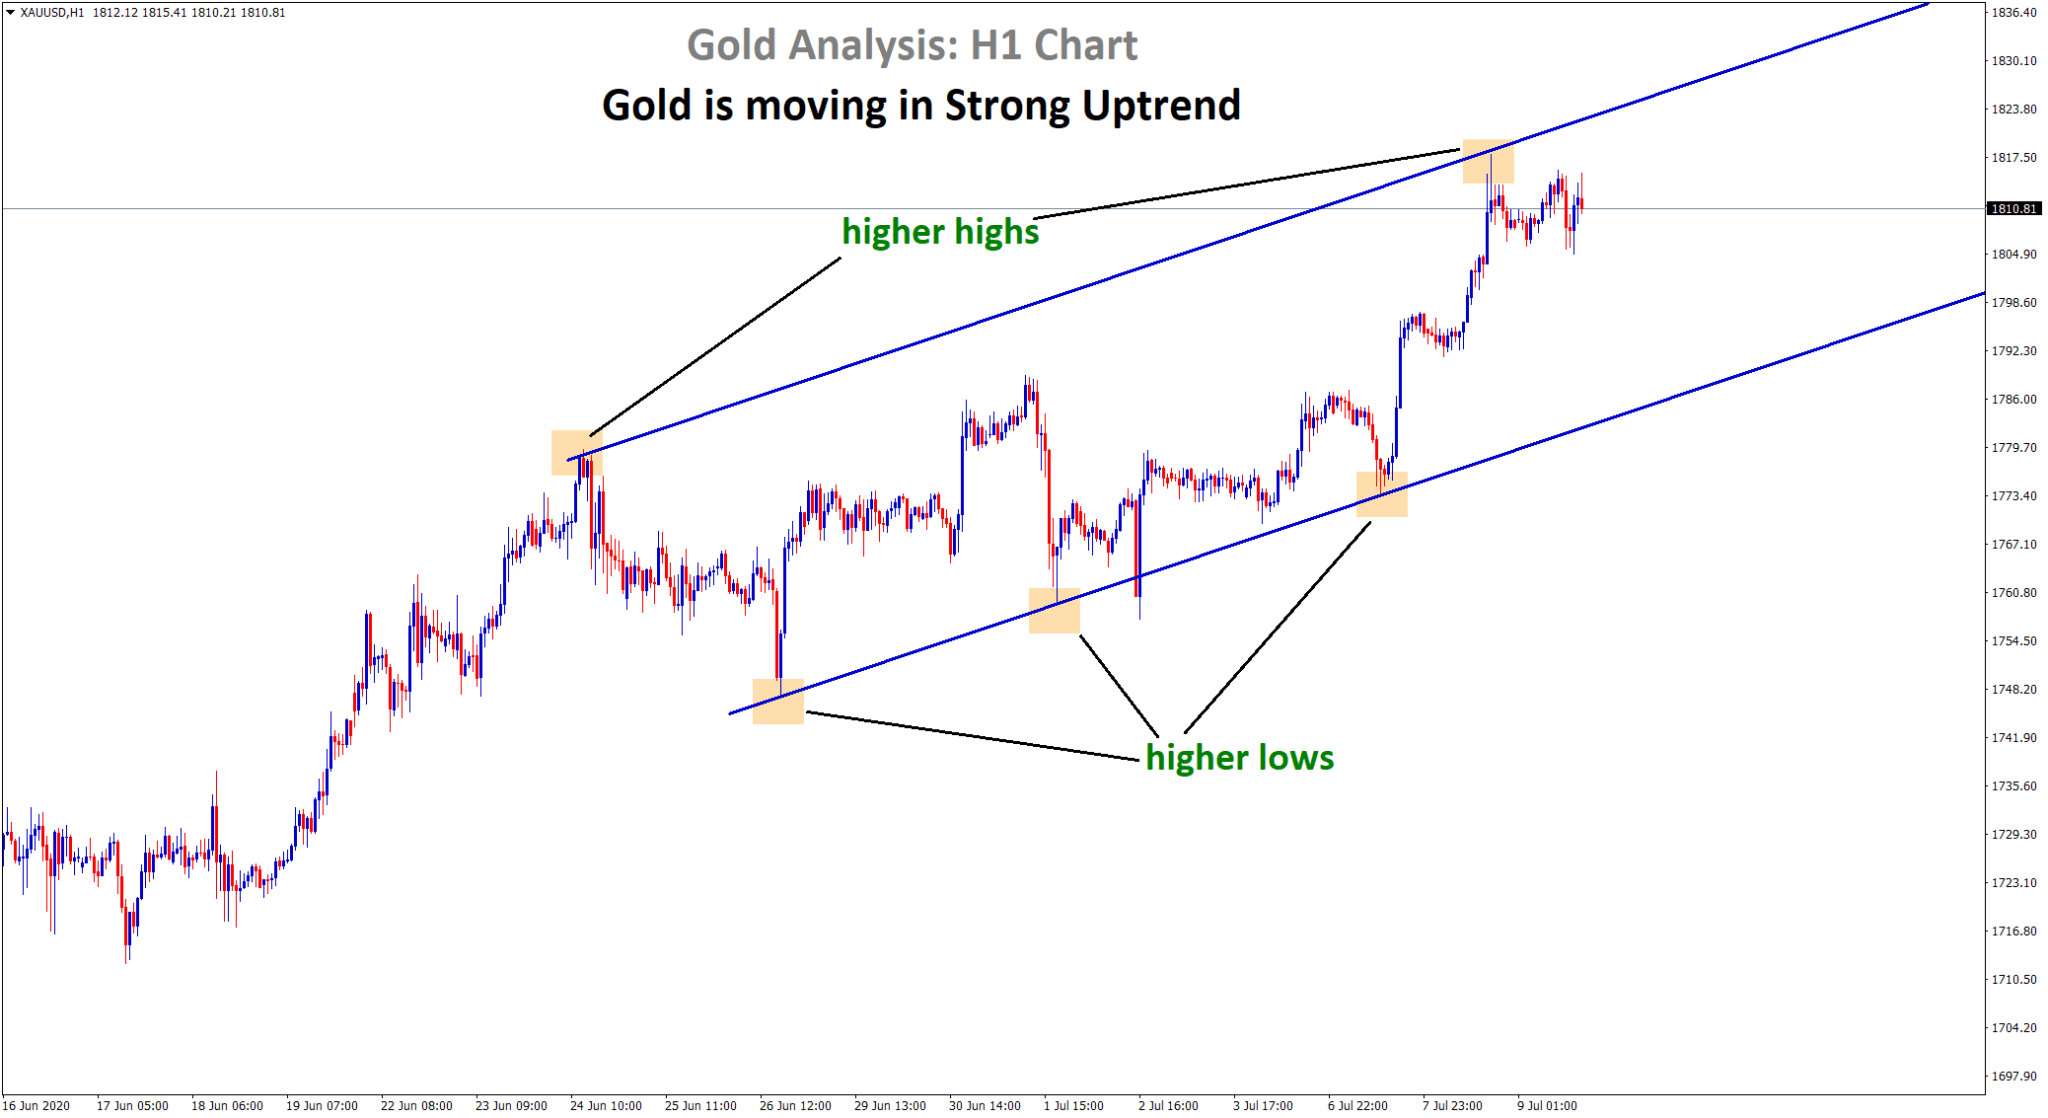 Gold moving in an uptrend forming hh hl